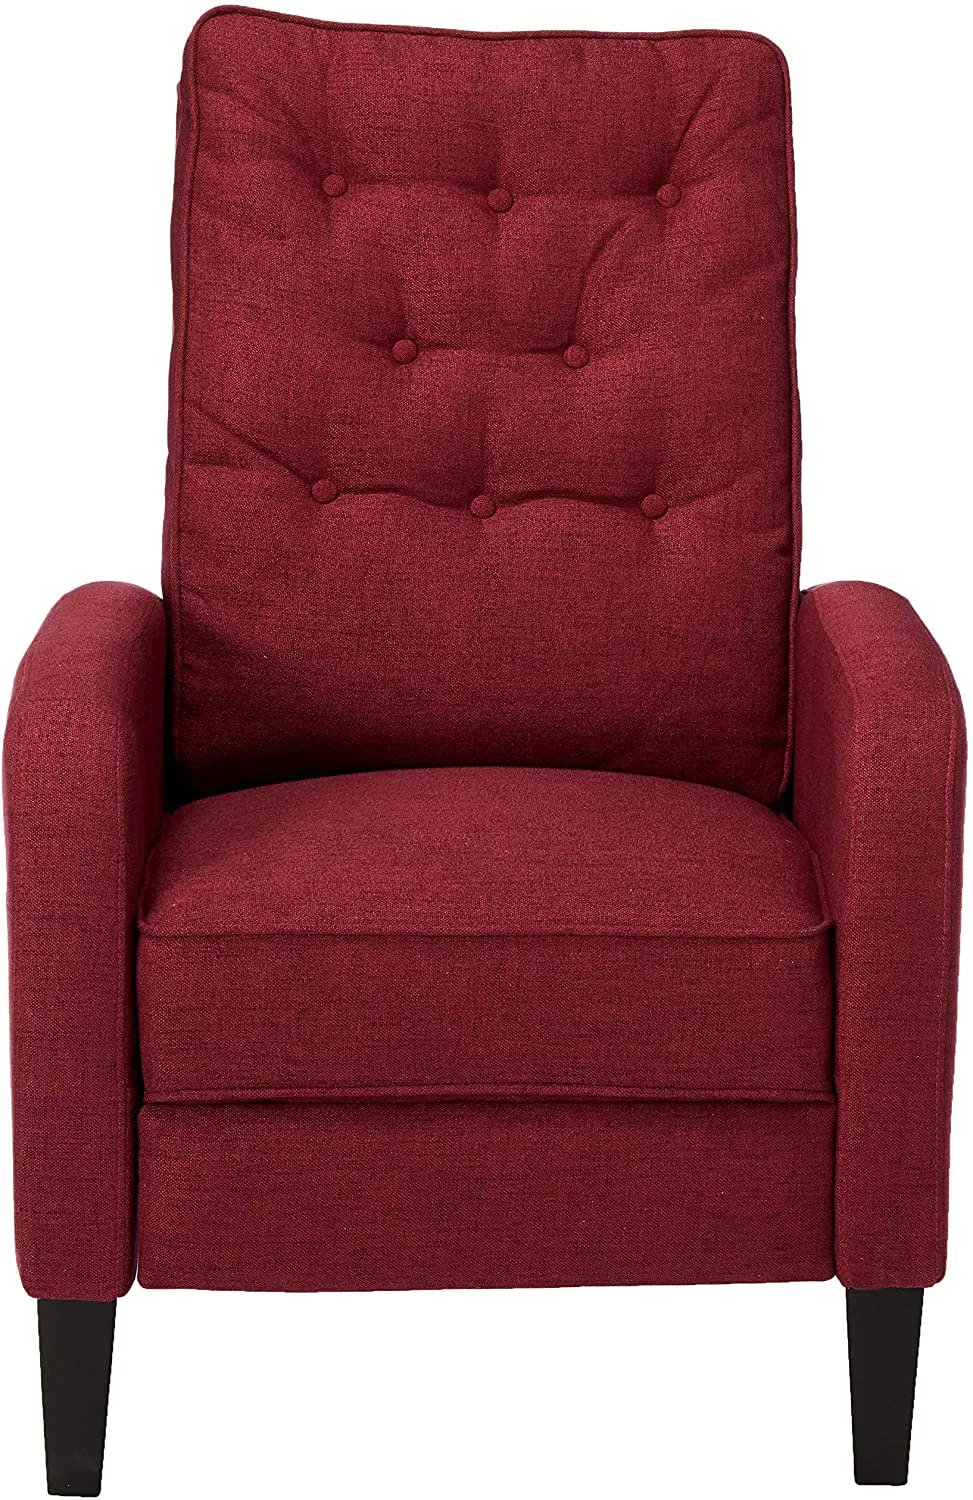 Simple Style Linen Fabric Push Back Recliner with Button Design High Back Chair